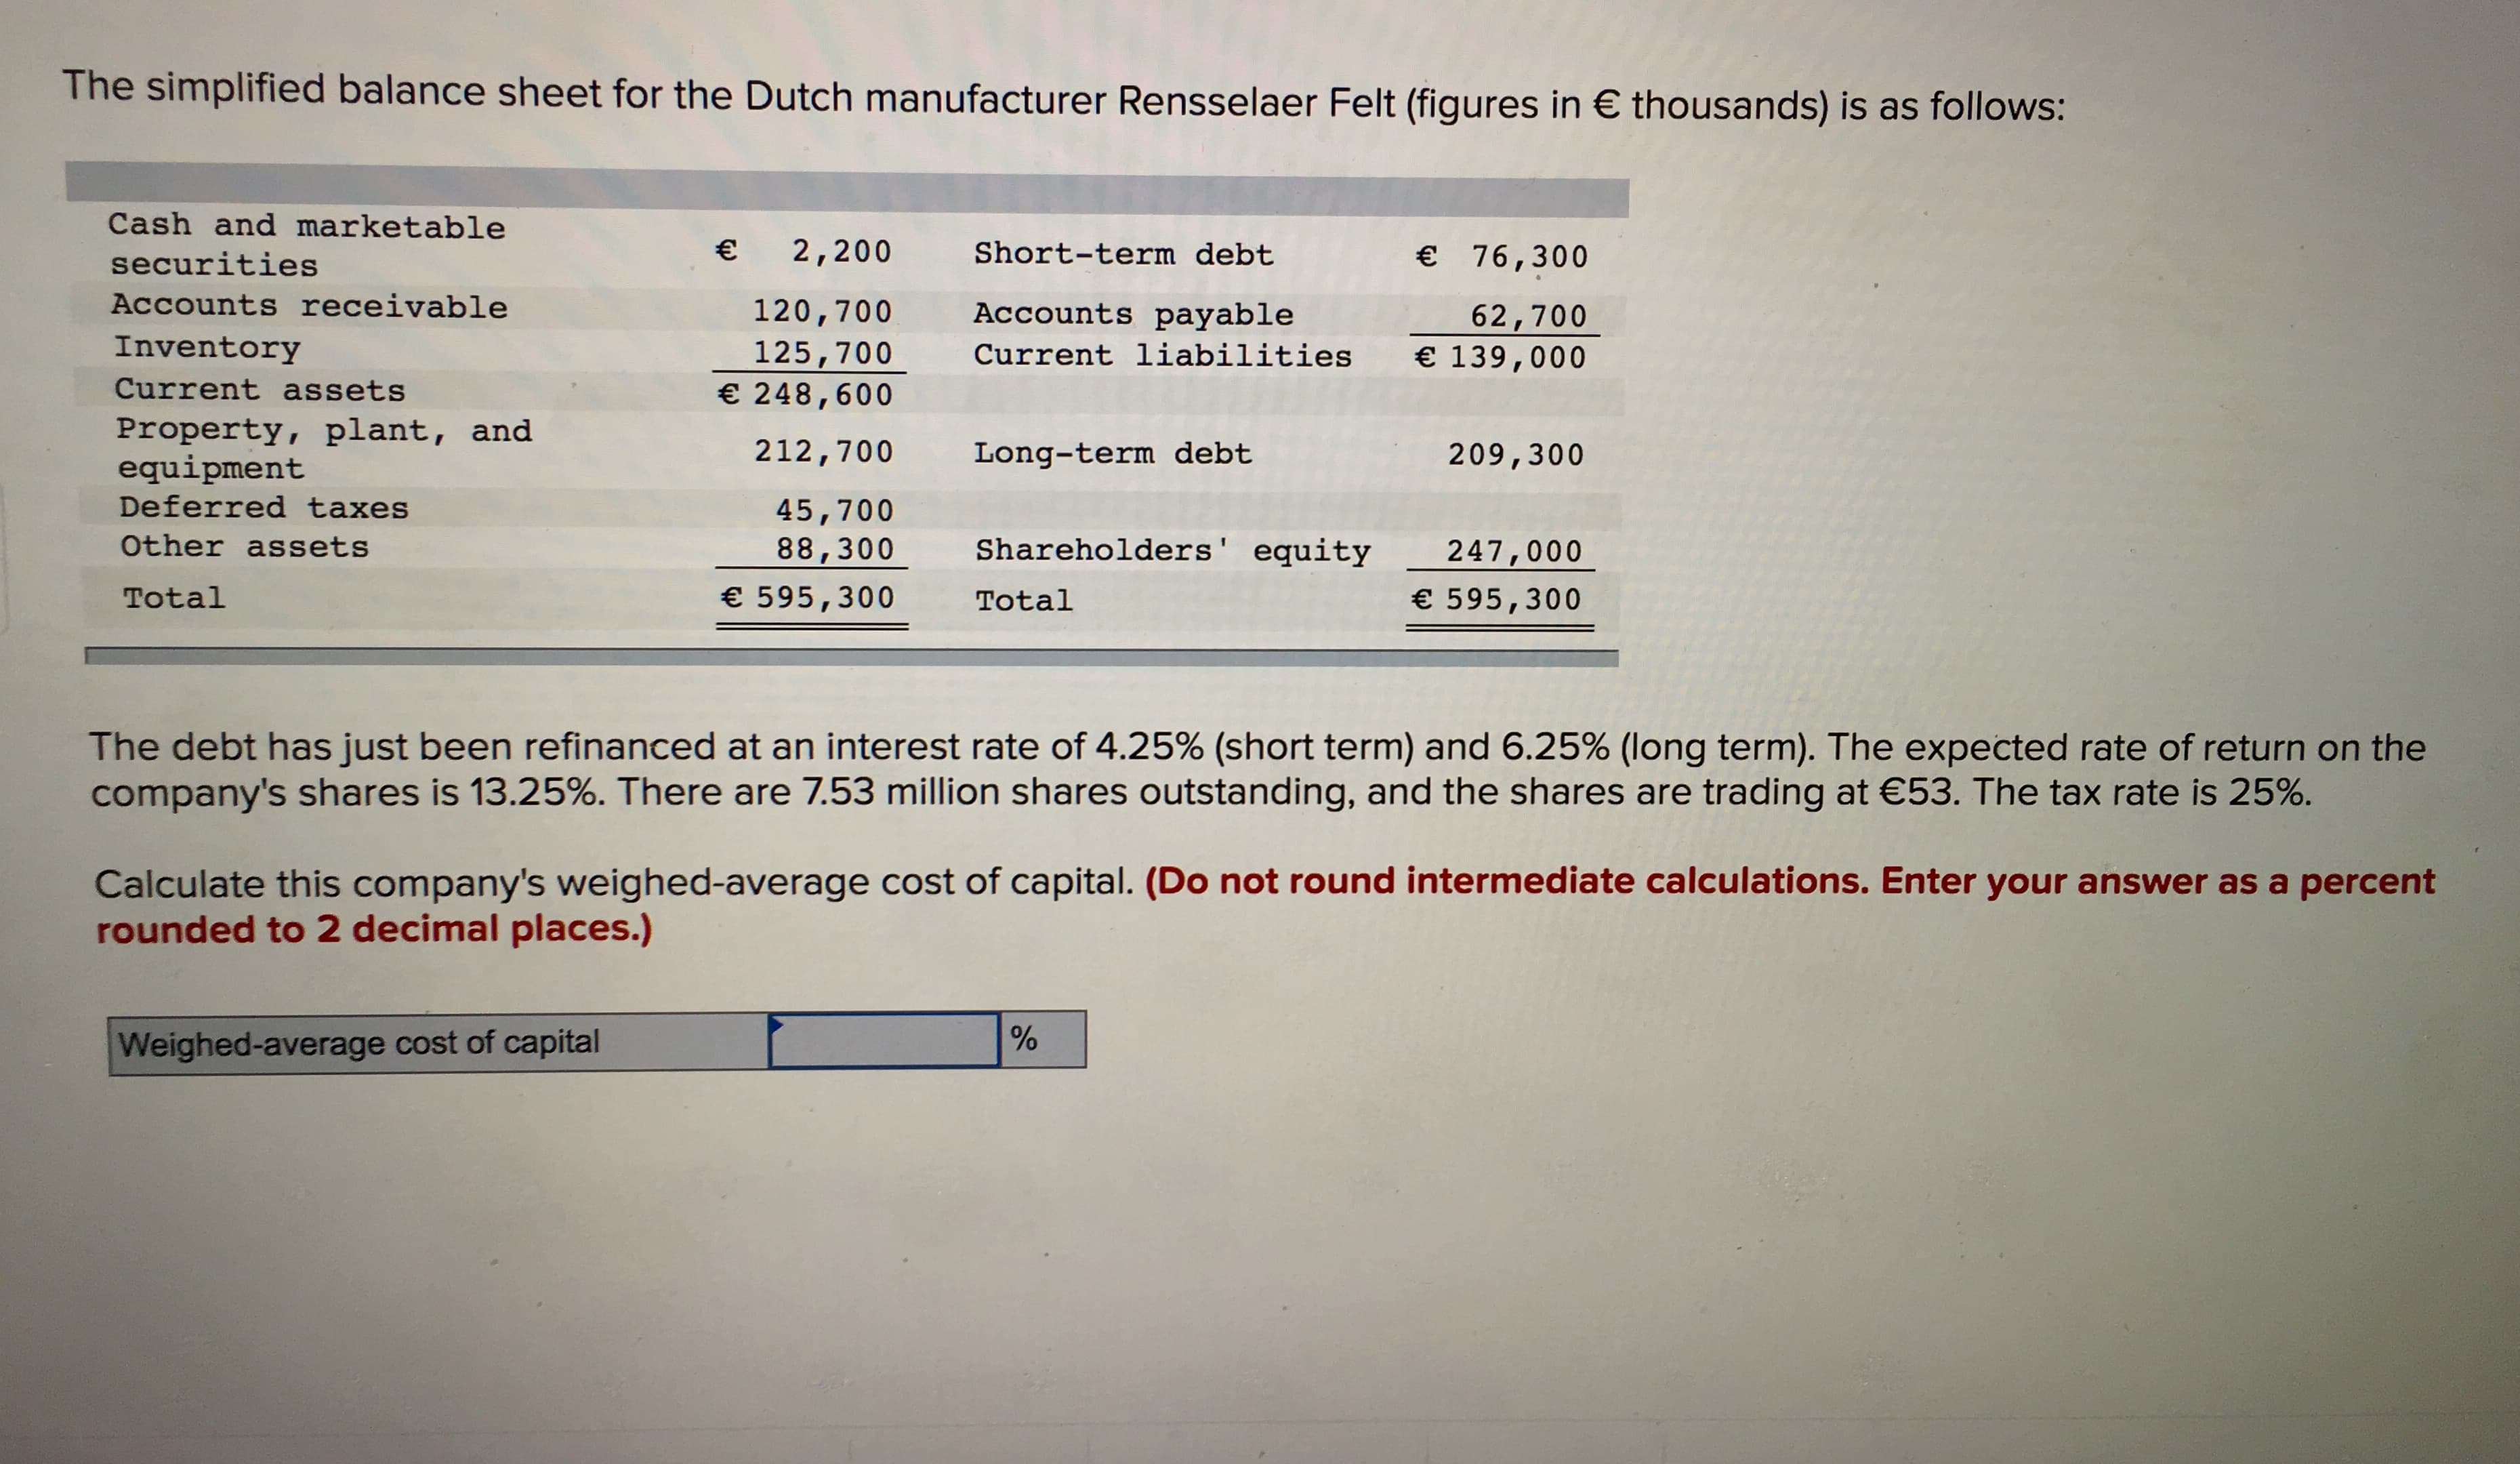 The simplified balance sheet for the Dutch manufacturer Rensselaer Felt (figures in € thousands) is as follows:
Cash and marketable
2,200
€
Short-term debt
€ 76,300
securities
Accounts receivable
120,700
Accounts payable
62,700
€ 139,000
Inventory
125,700
€ 248,600
Current liabilities
Current assets
Property, plant, and
equipment
212,700
Long-term debt
209,300
Deferred taxes
45,700
88,300
Other assets
Shareholders' equity
247,000
Total
€ 595,300
€ 595,300
Total
The debt has just been refinanced at an interest rate of 4.25% (short term) and 6.25% (long term). The expected rate of return on the
company's shares is 13.25%. There are 7.53 million shares outstanding, and the shares are trading at €53. The tax rate is 25%.
Calculate this company's weighed-average cost of capital. (Do not round intermediate calculations. Enter your answer as a percent
rounded to 2 decimal places.)
Weighed-average cost of capital
